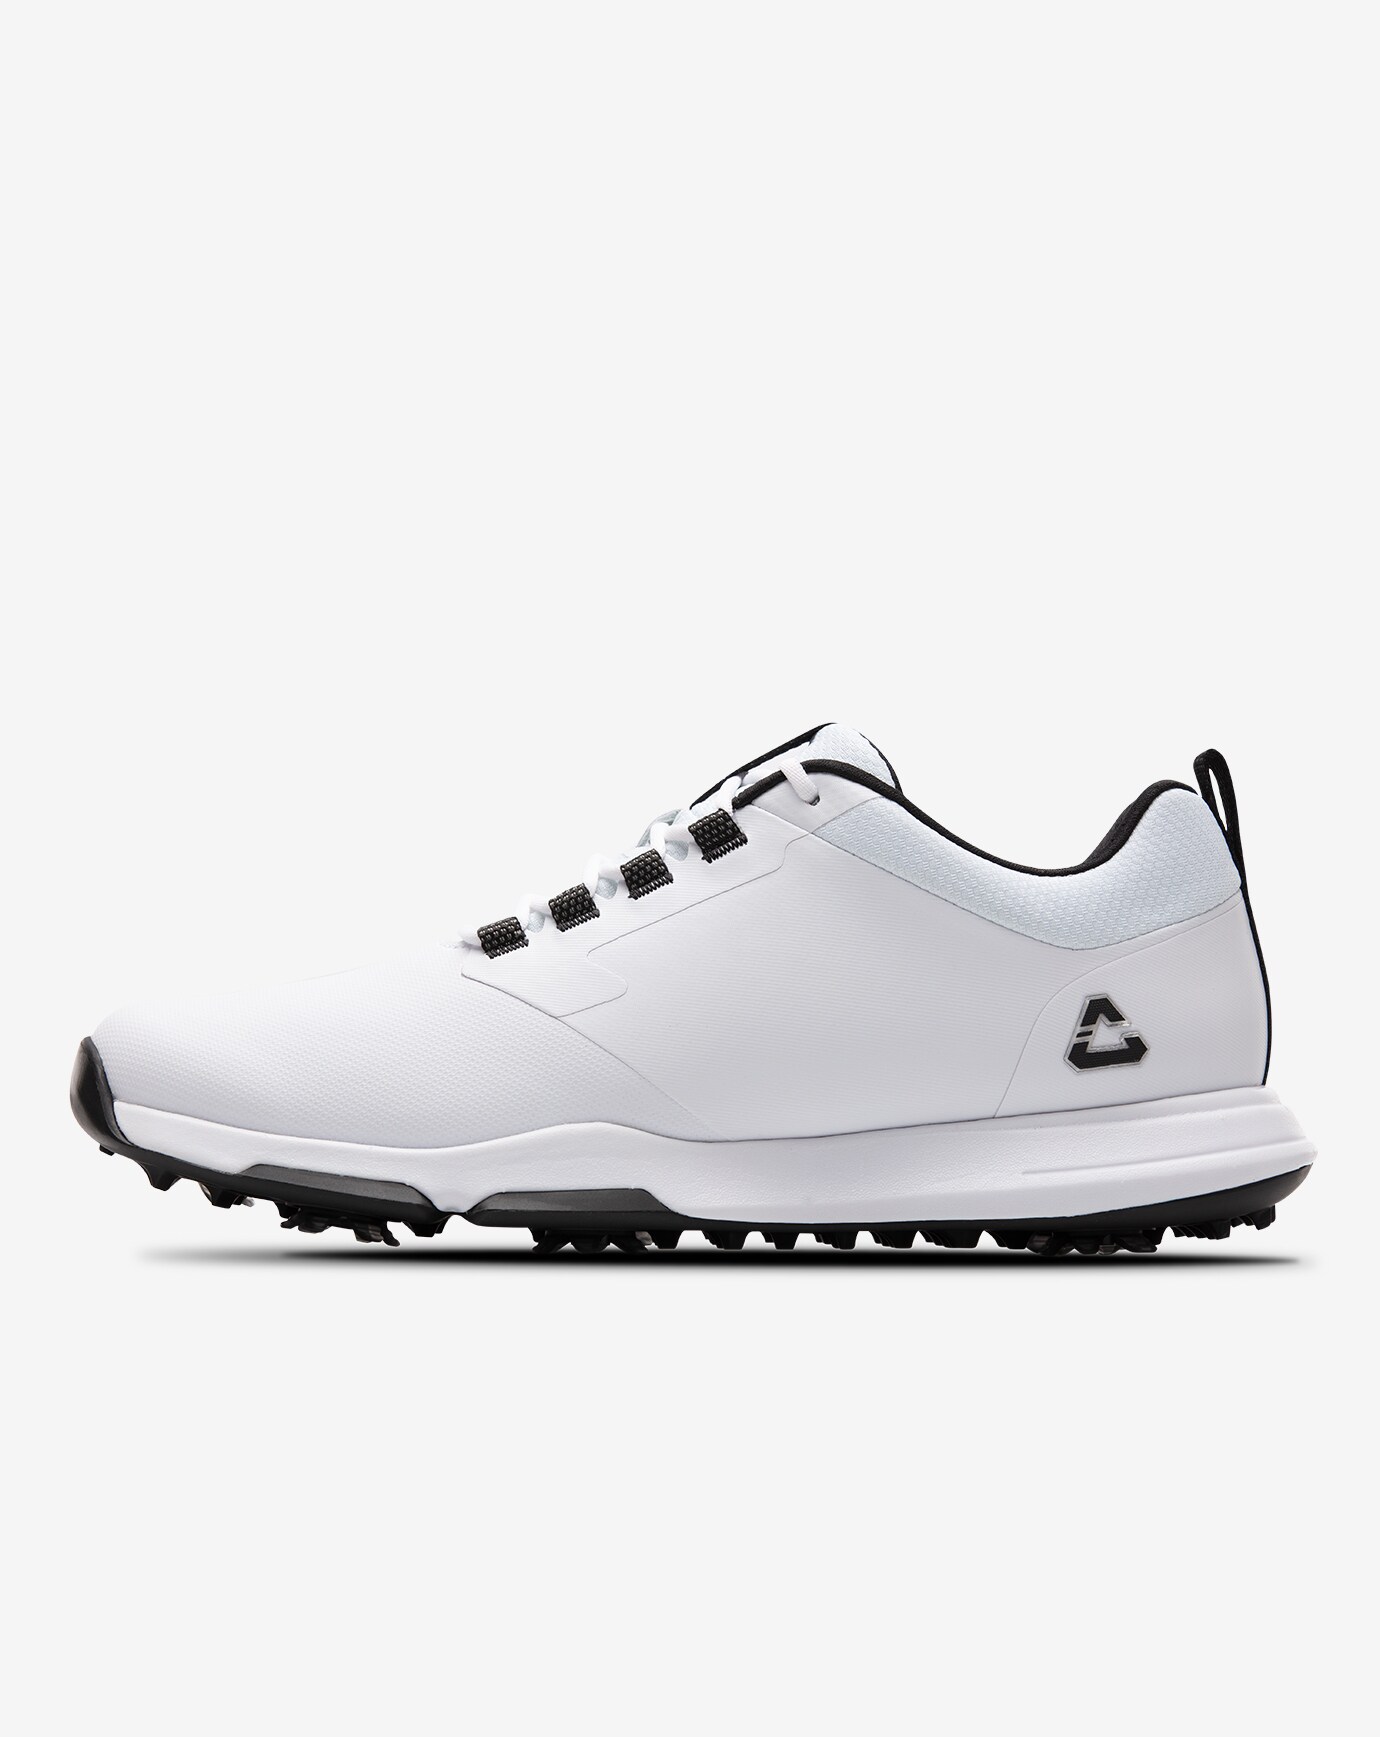 THE RINGER SPIKED GOLF SHOE Image 1